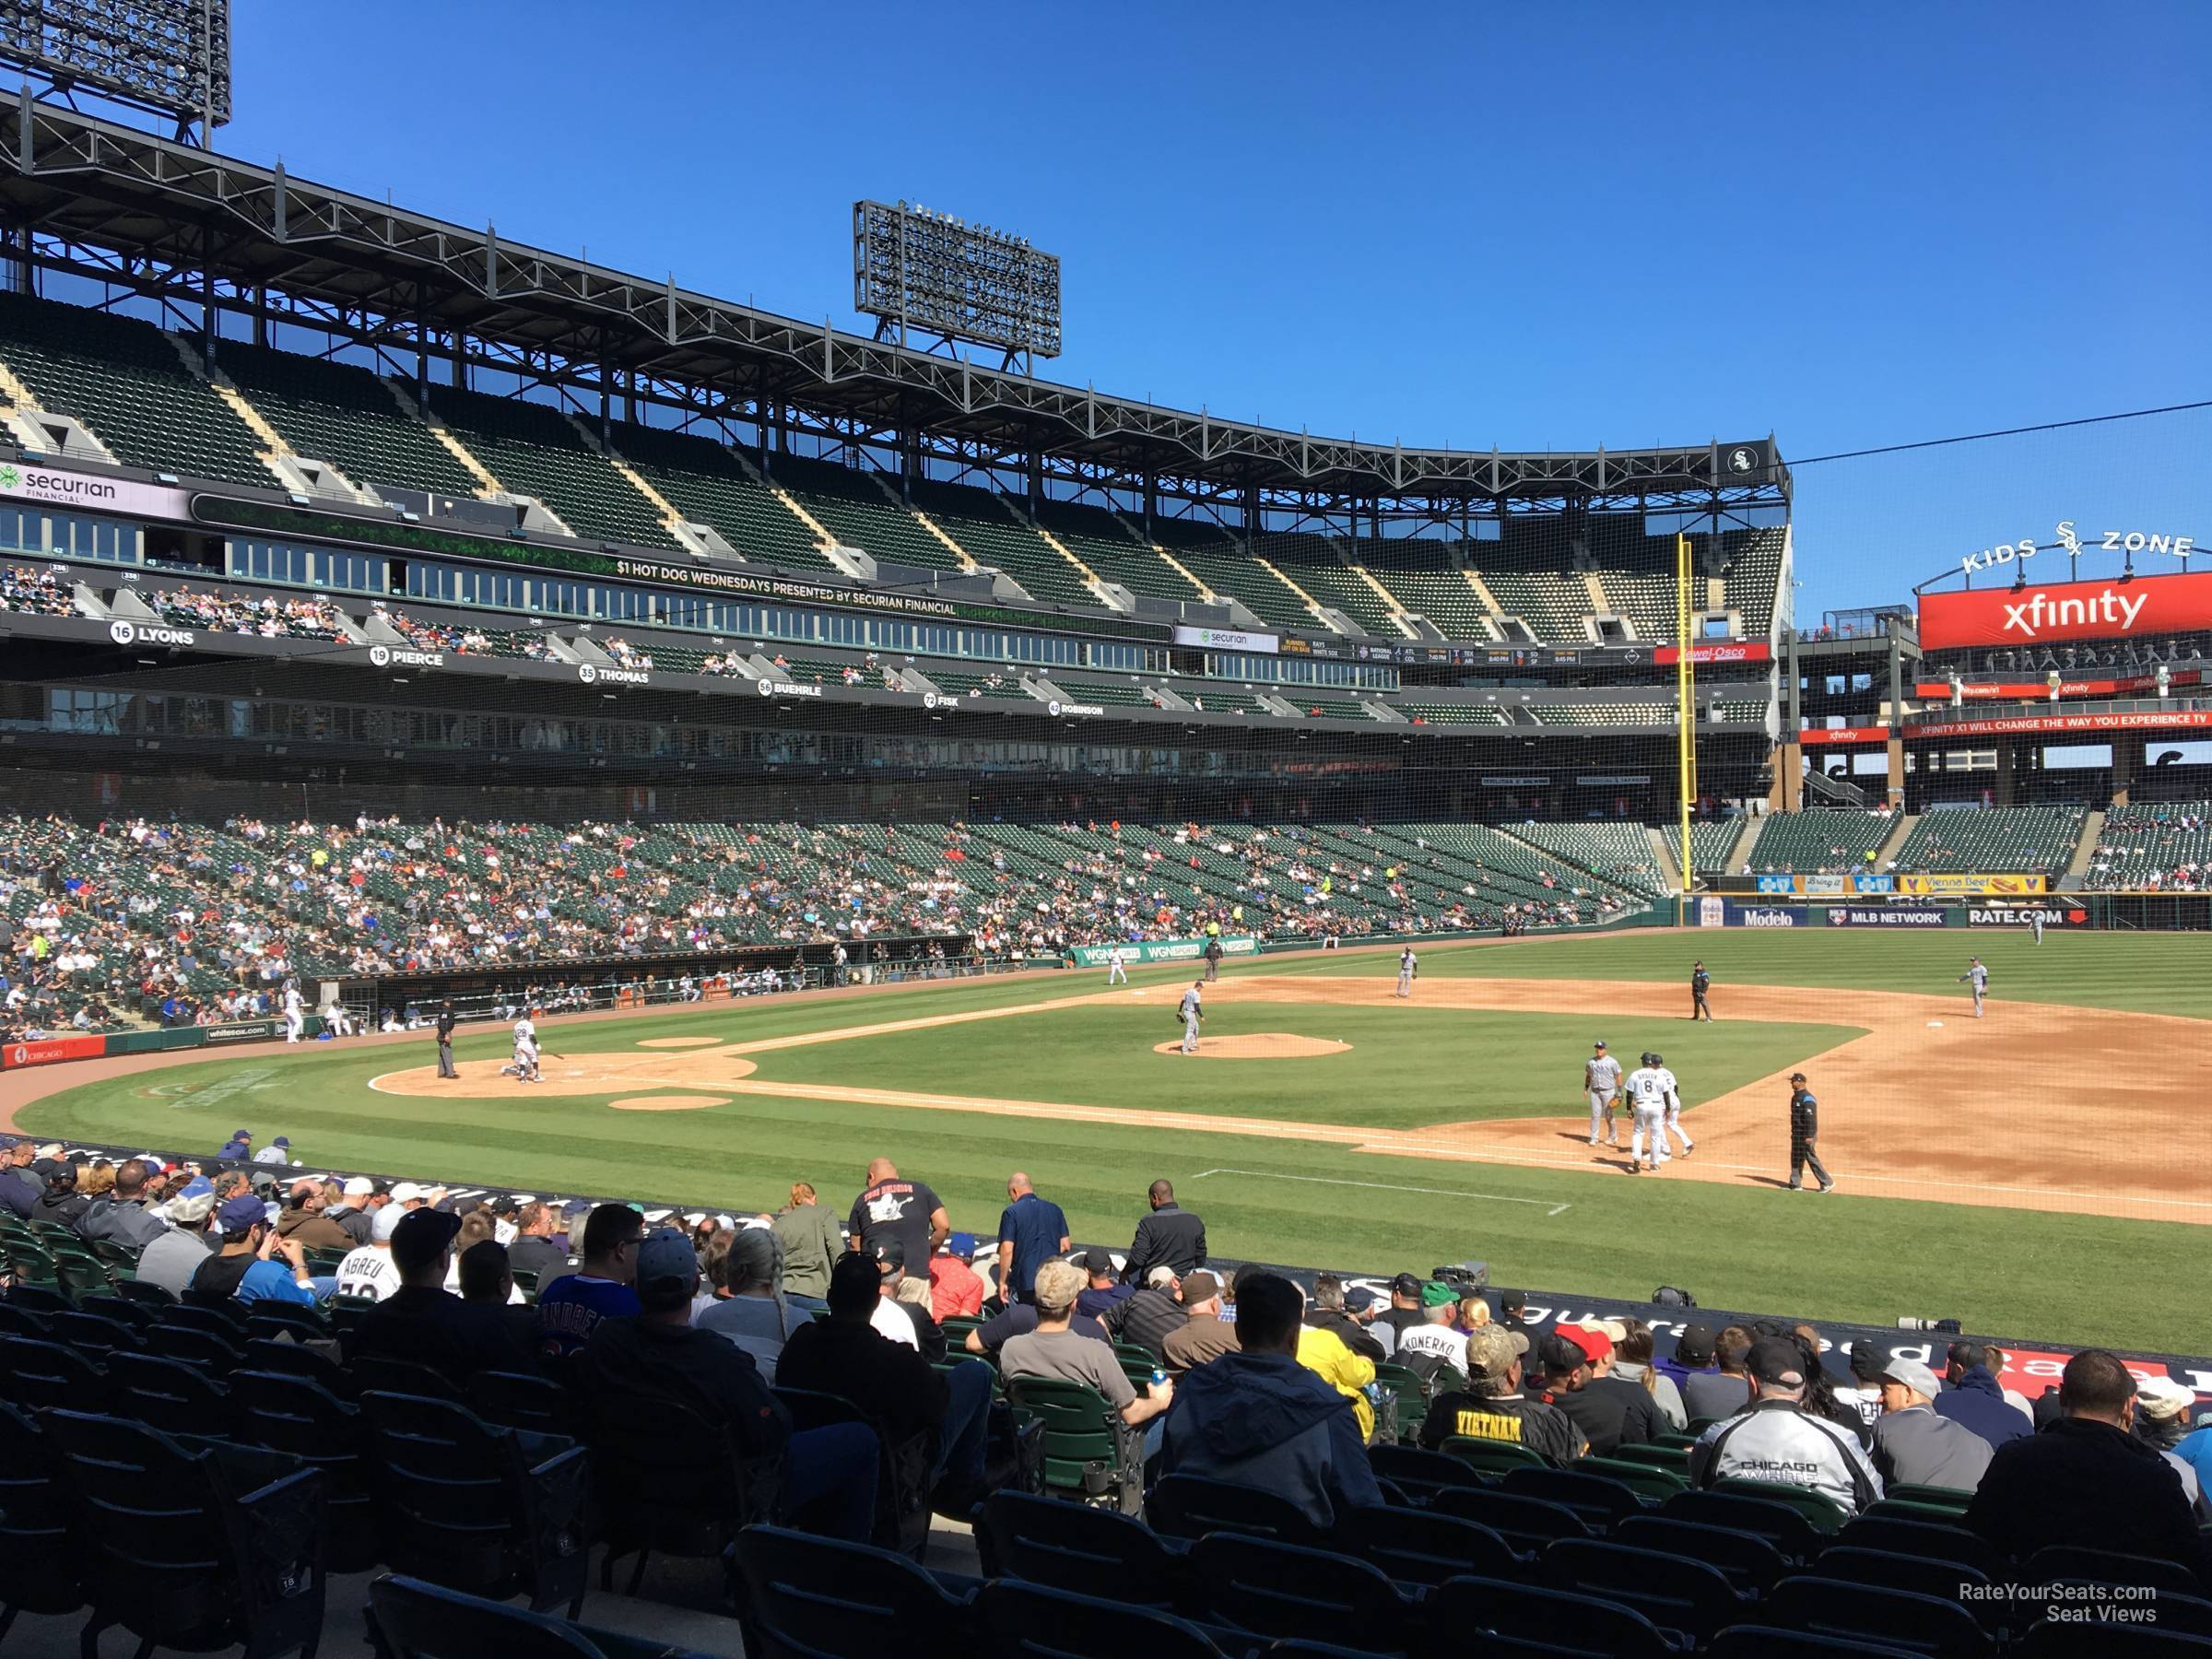 section 122, row 25 seat view  - guaranteed rate field